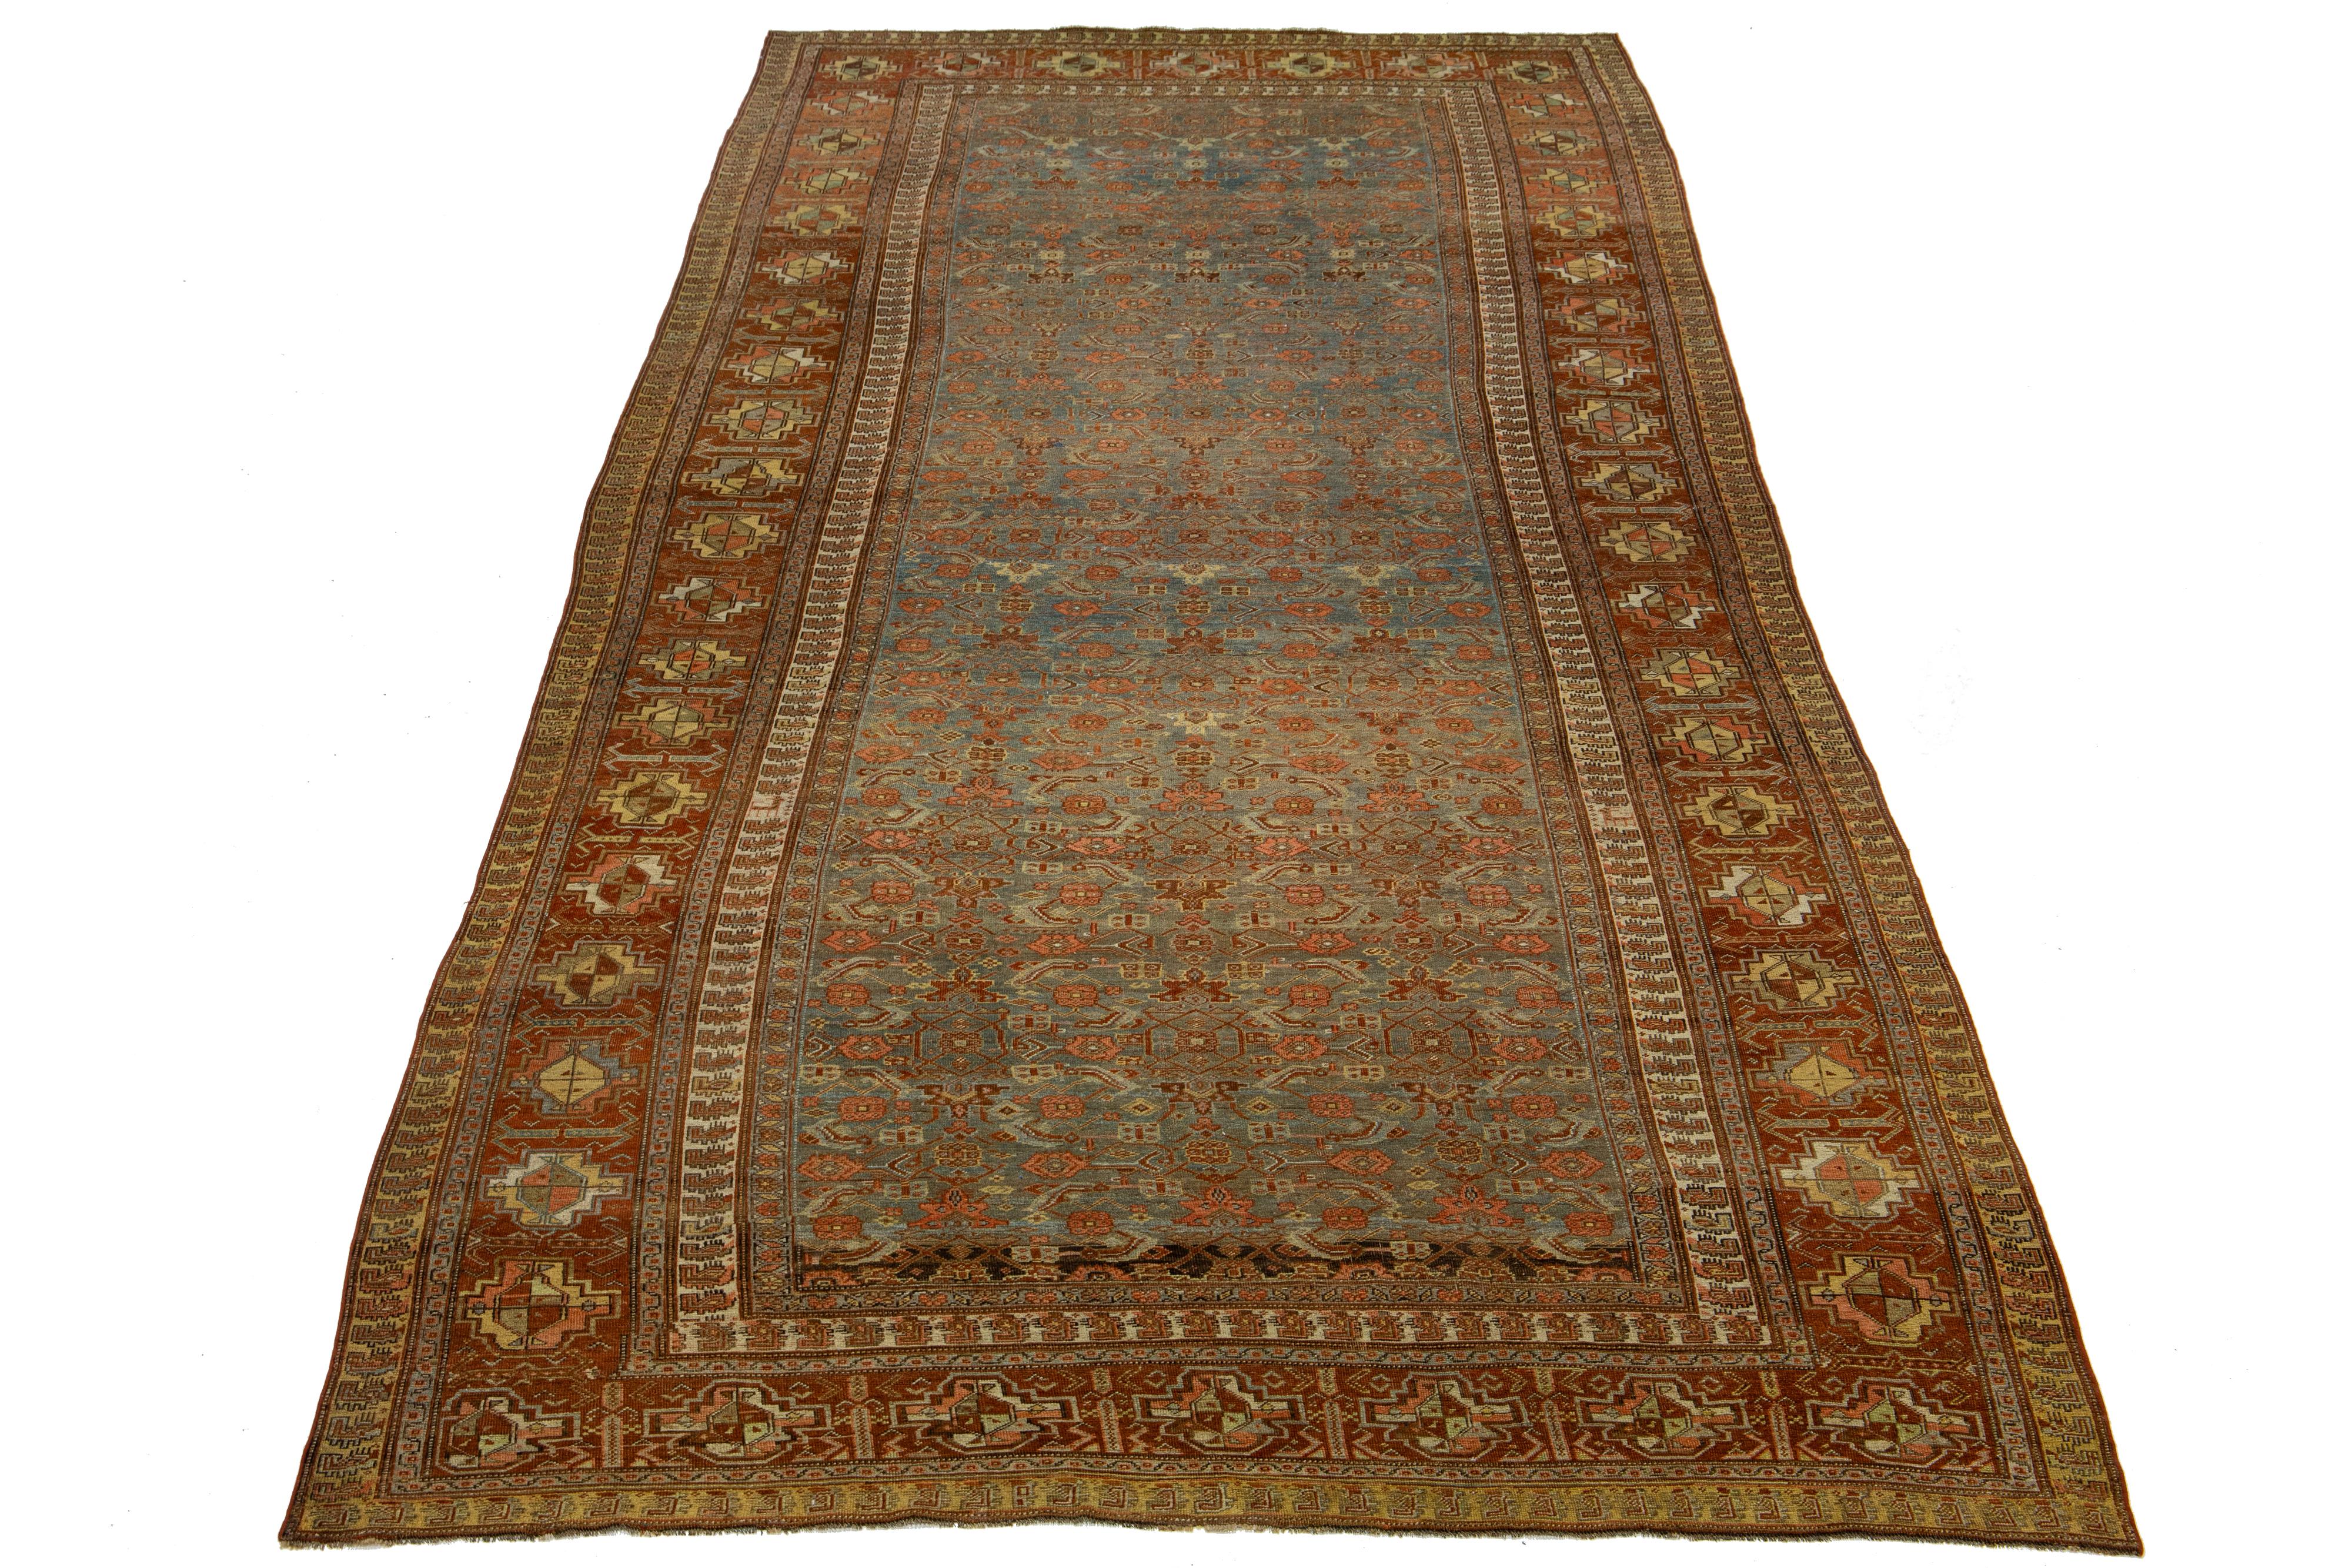 Beautiful antique Bidjar hand-knotted wool runner with a blue color field. This Bidjar rug has a designed rusted frame with beige and yellow accents in a gorgeous all-over geometric design.

This rug measures 7'3